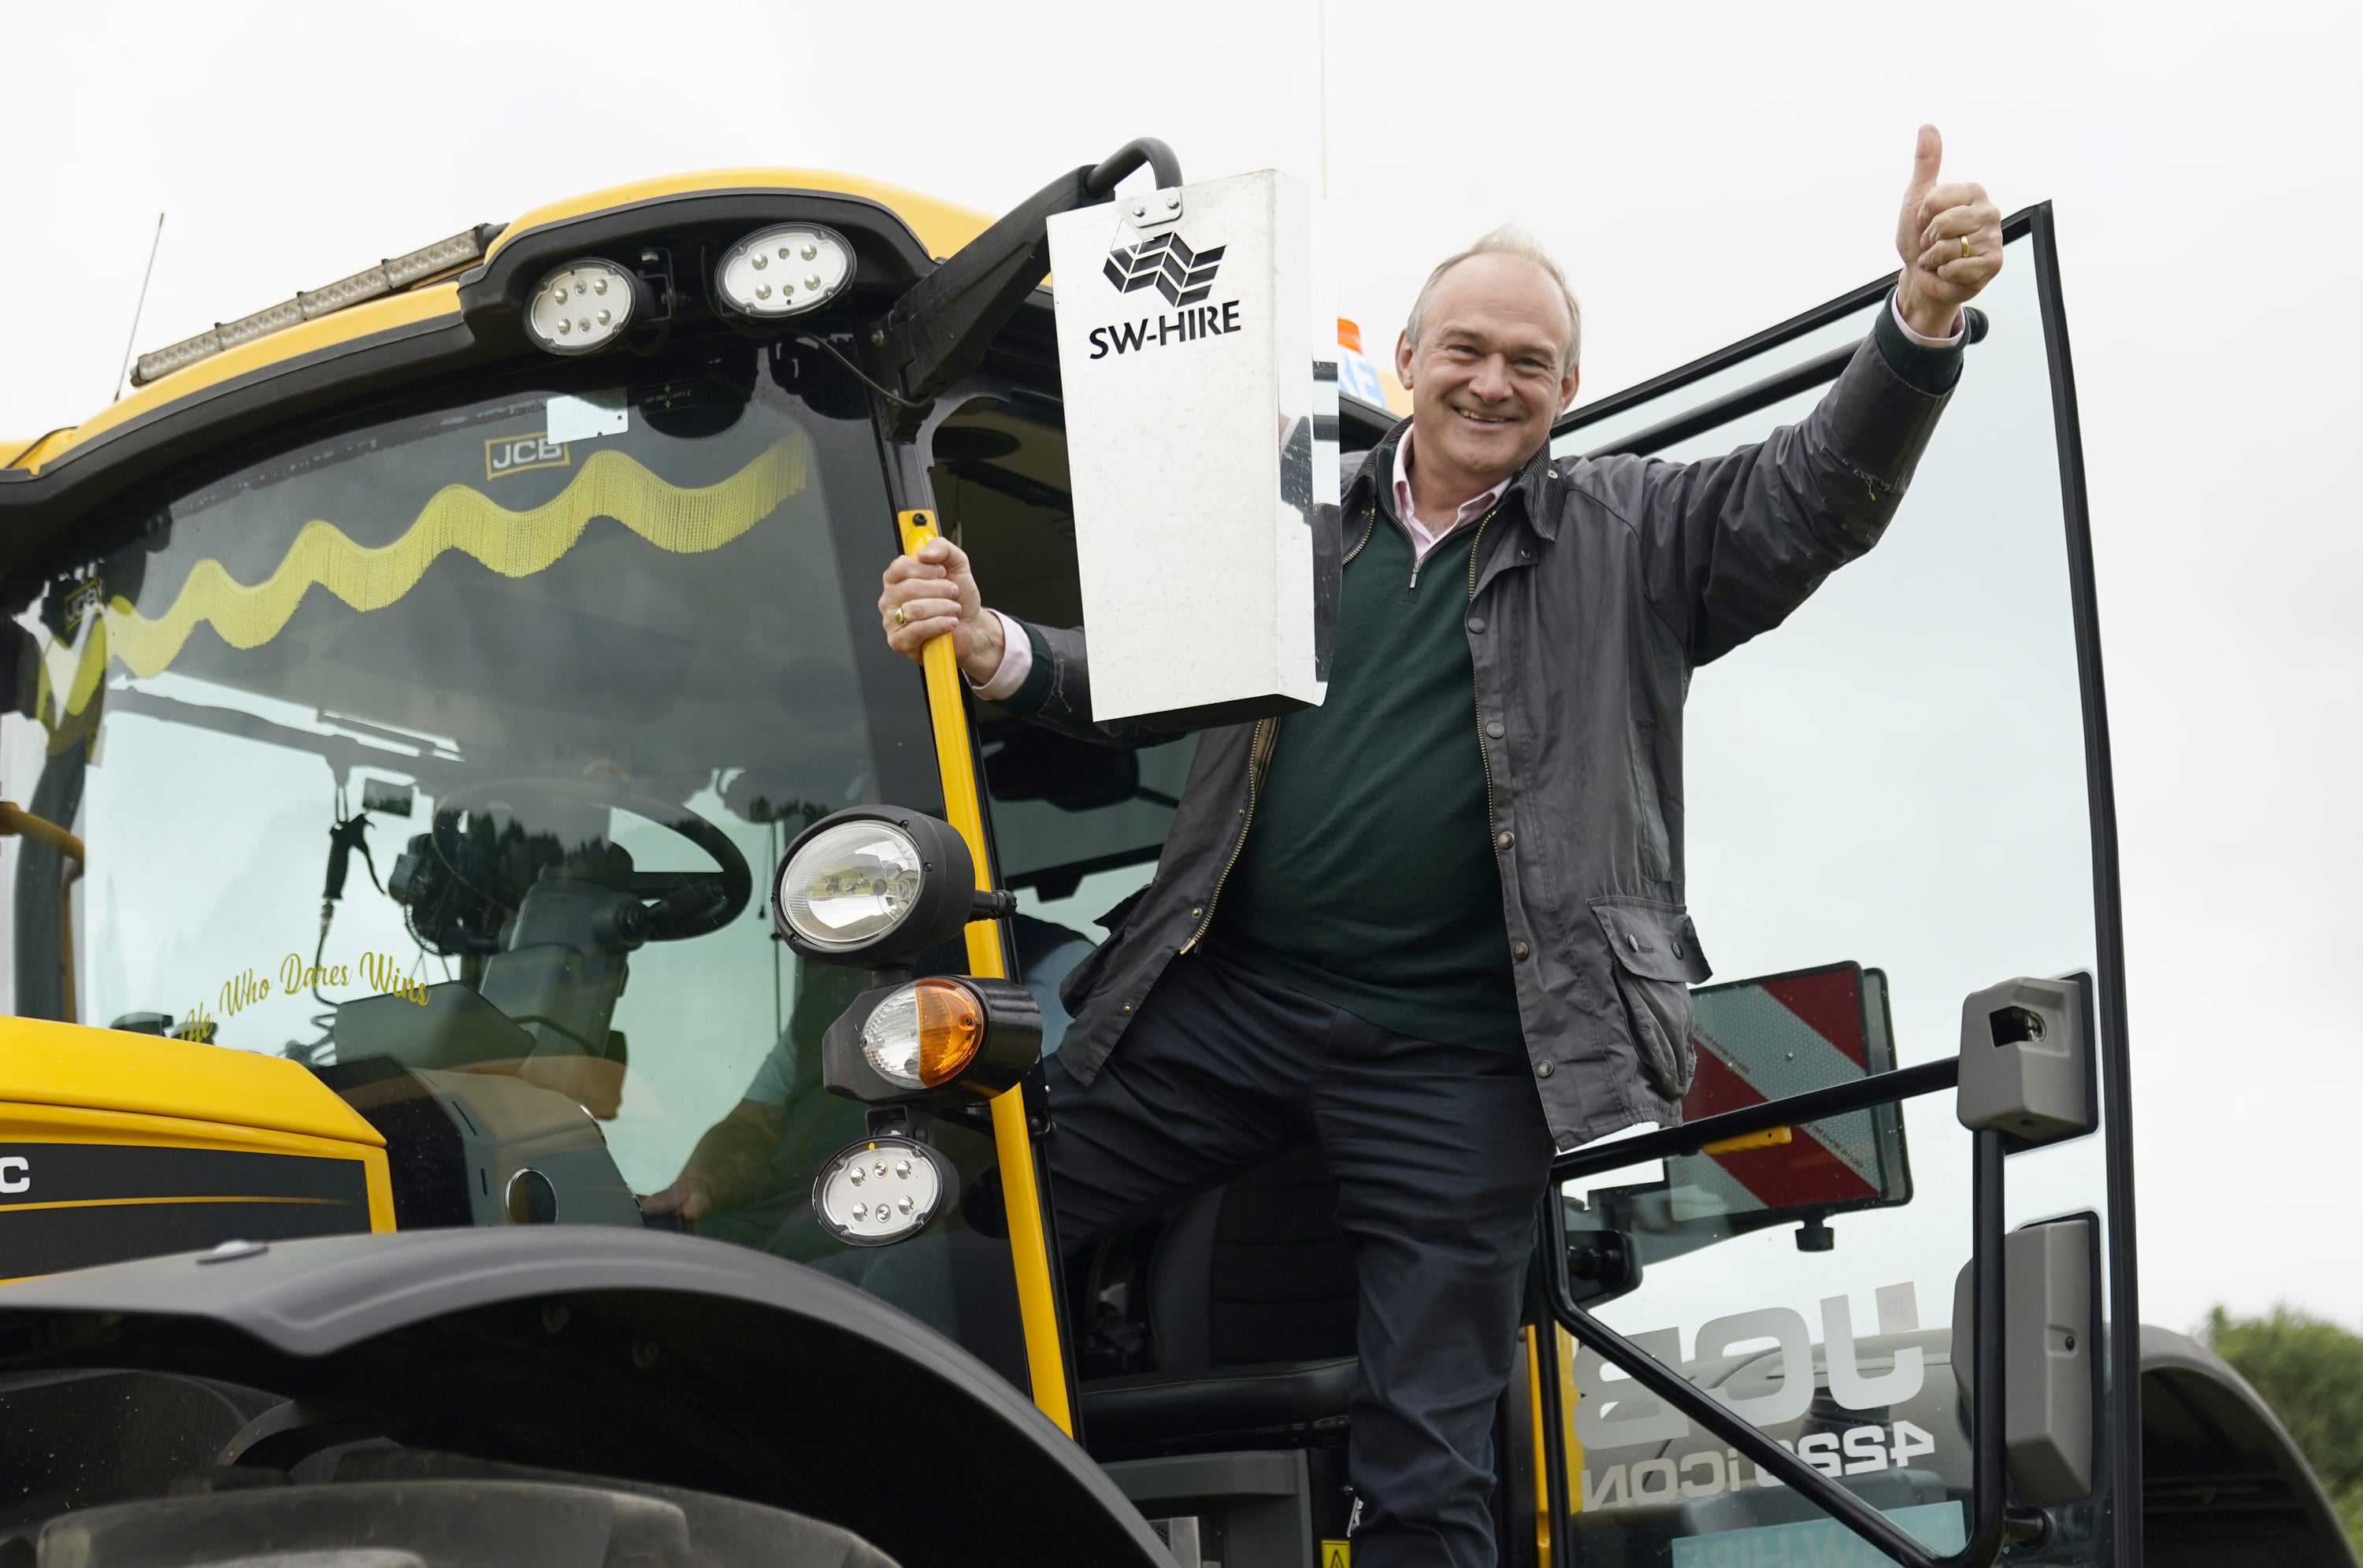 Sir Ed Davey climbs from a yellow tractor on the final day of the campaign (Andrew Matthews/PA)